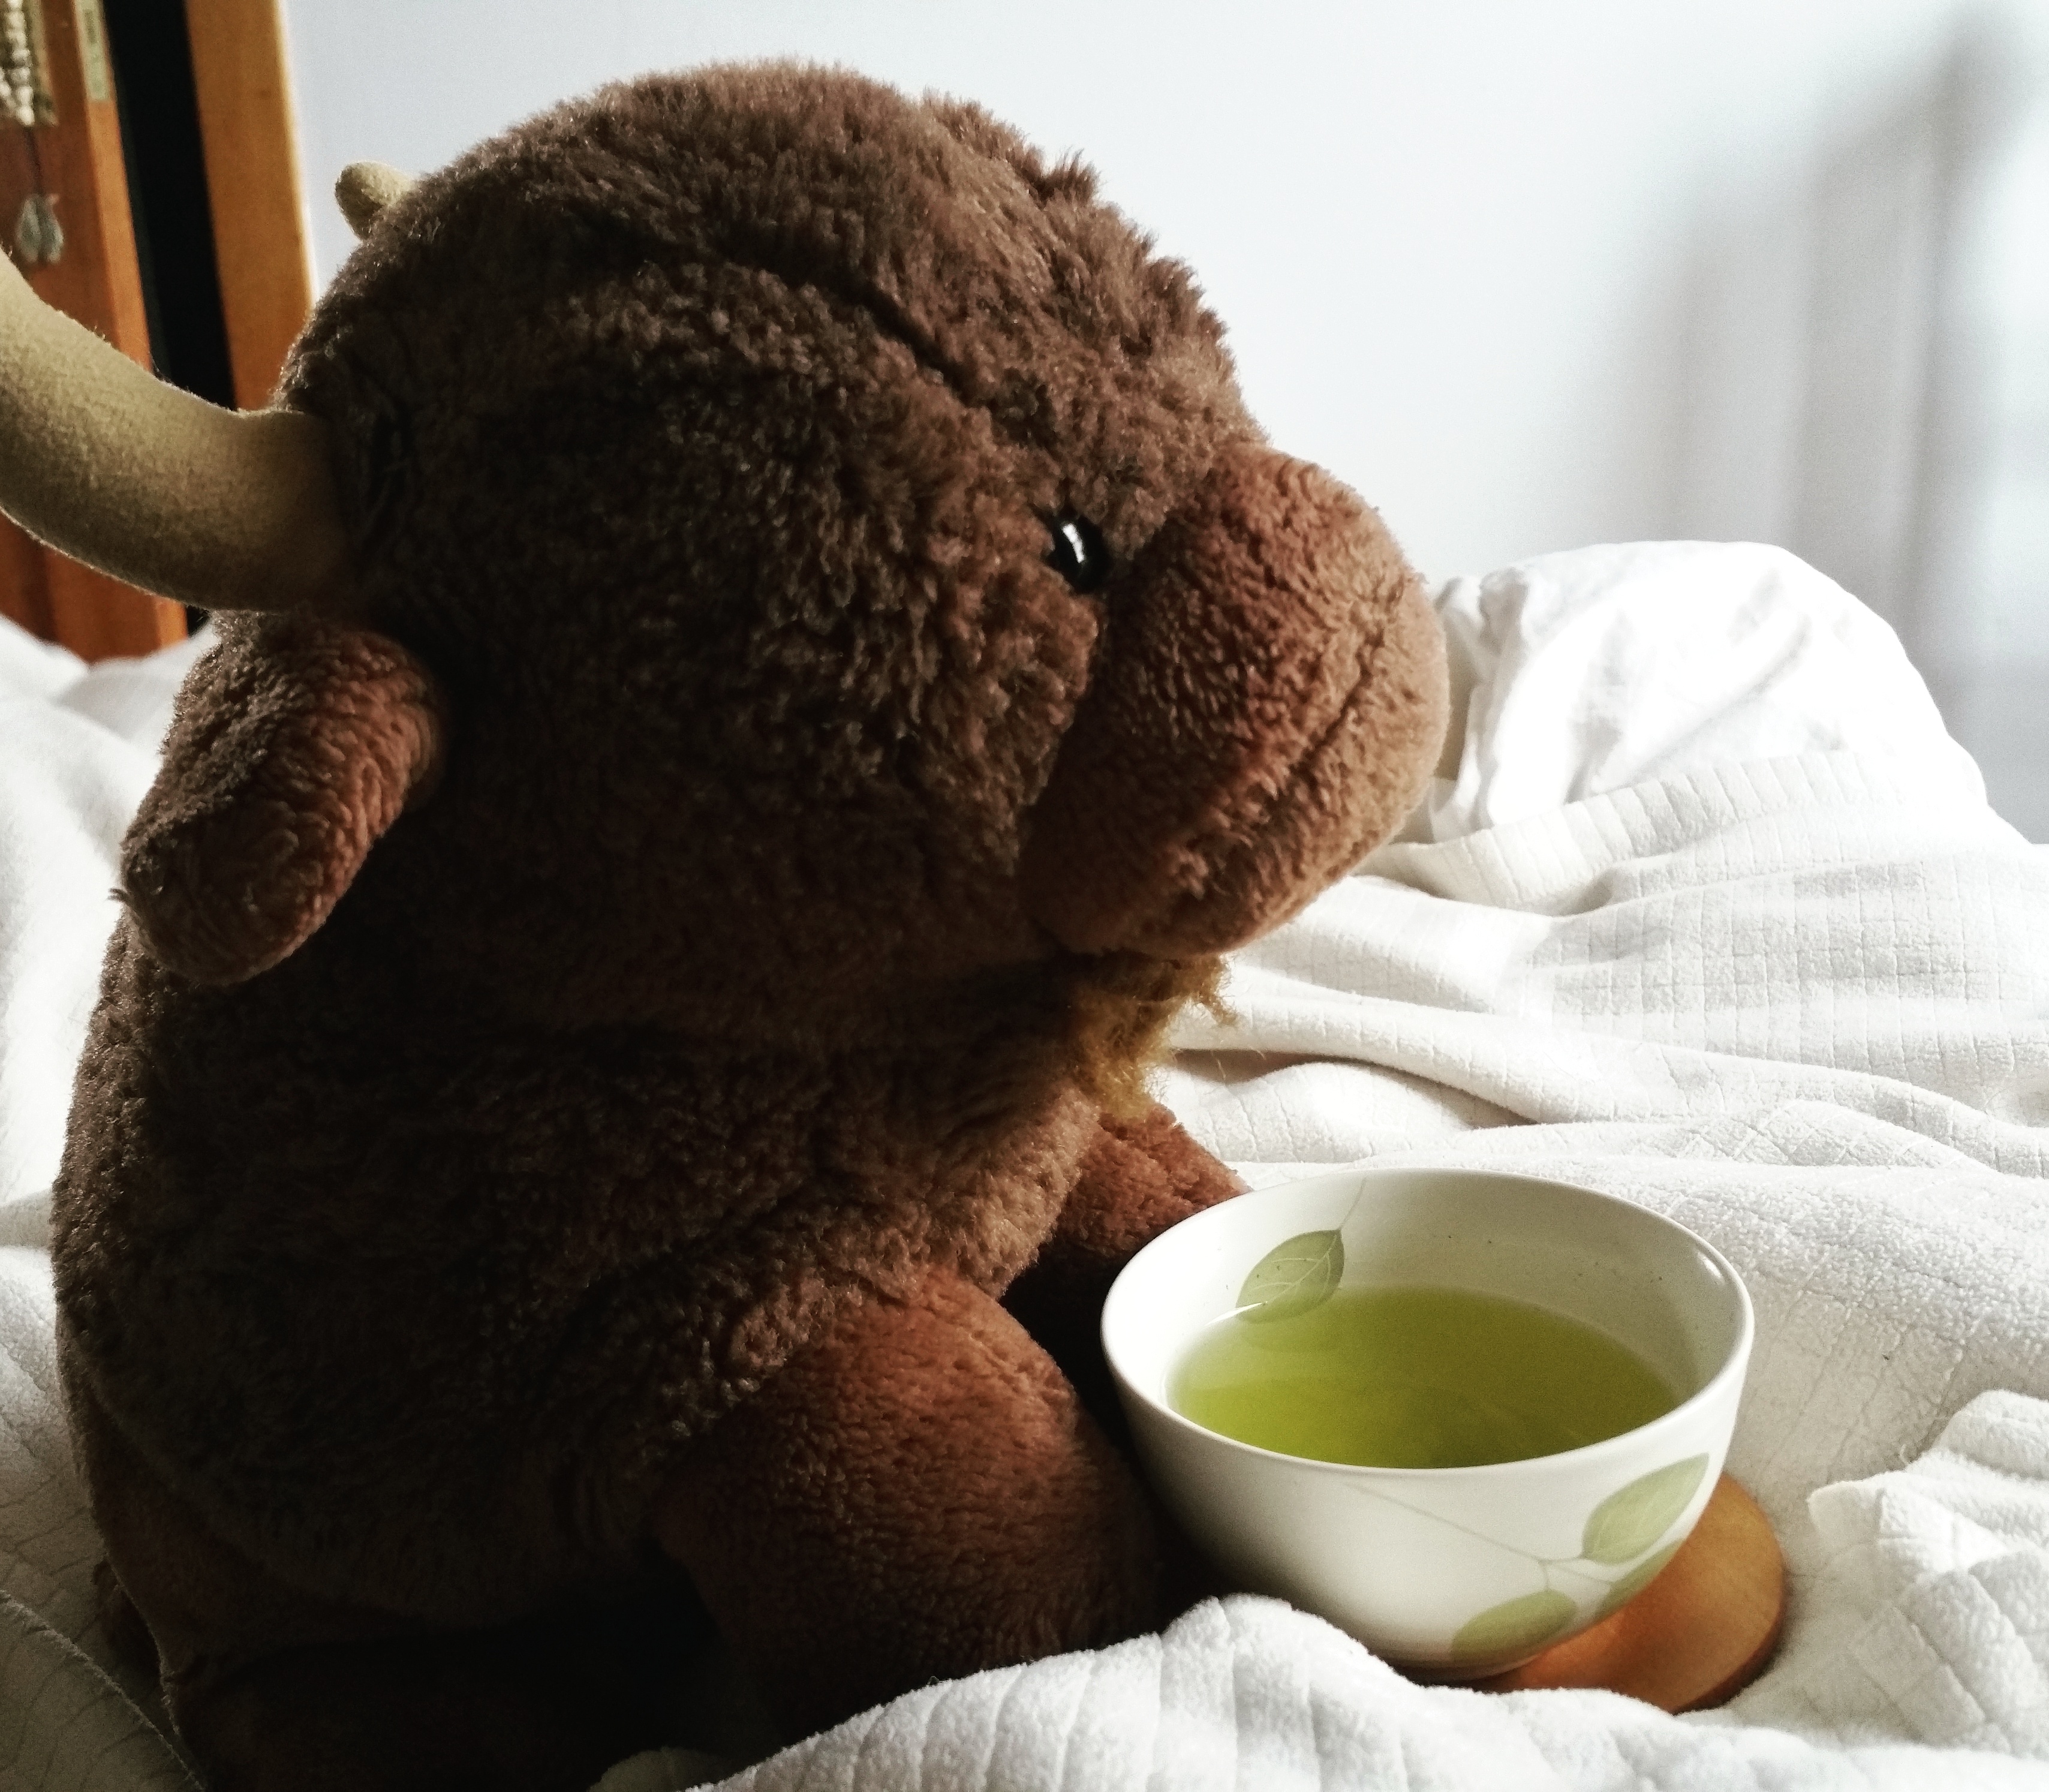 Luff, the tea mascot from Being Tea, looking contemplative with a cup of tea